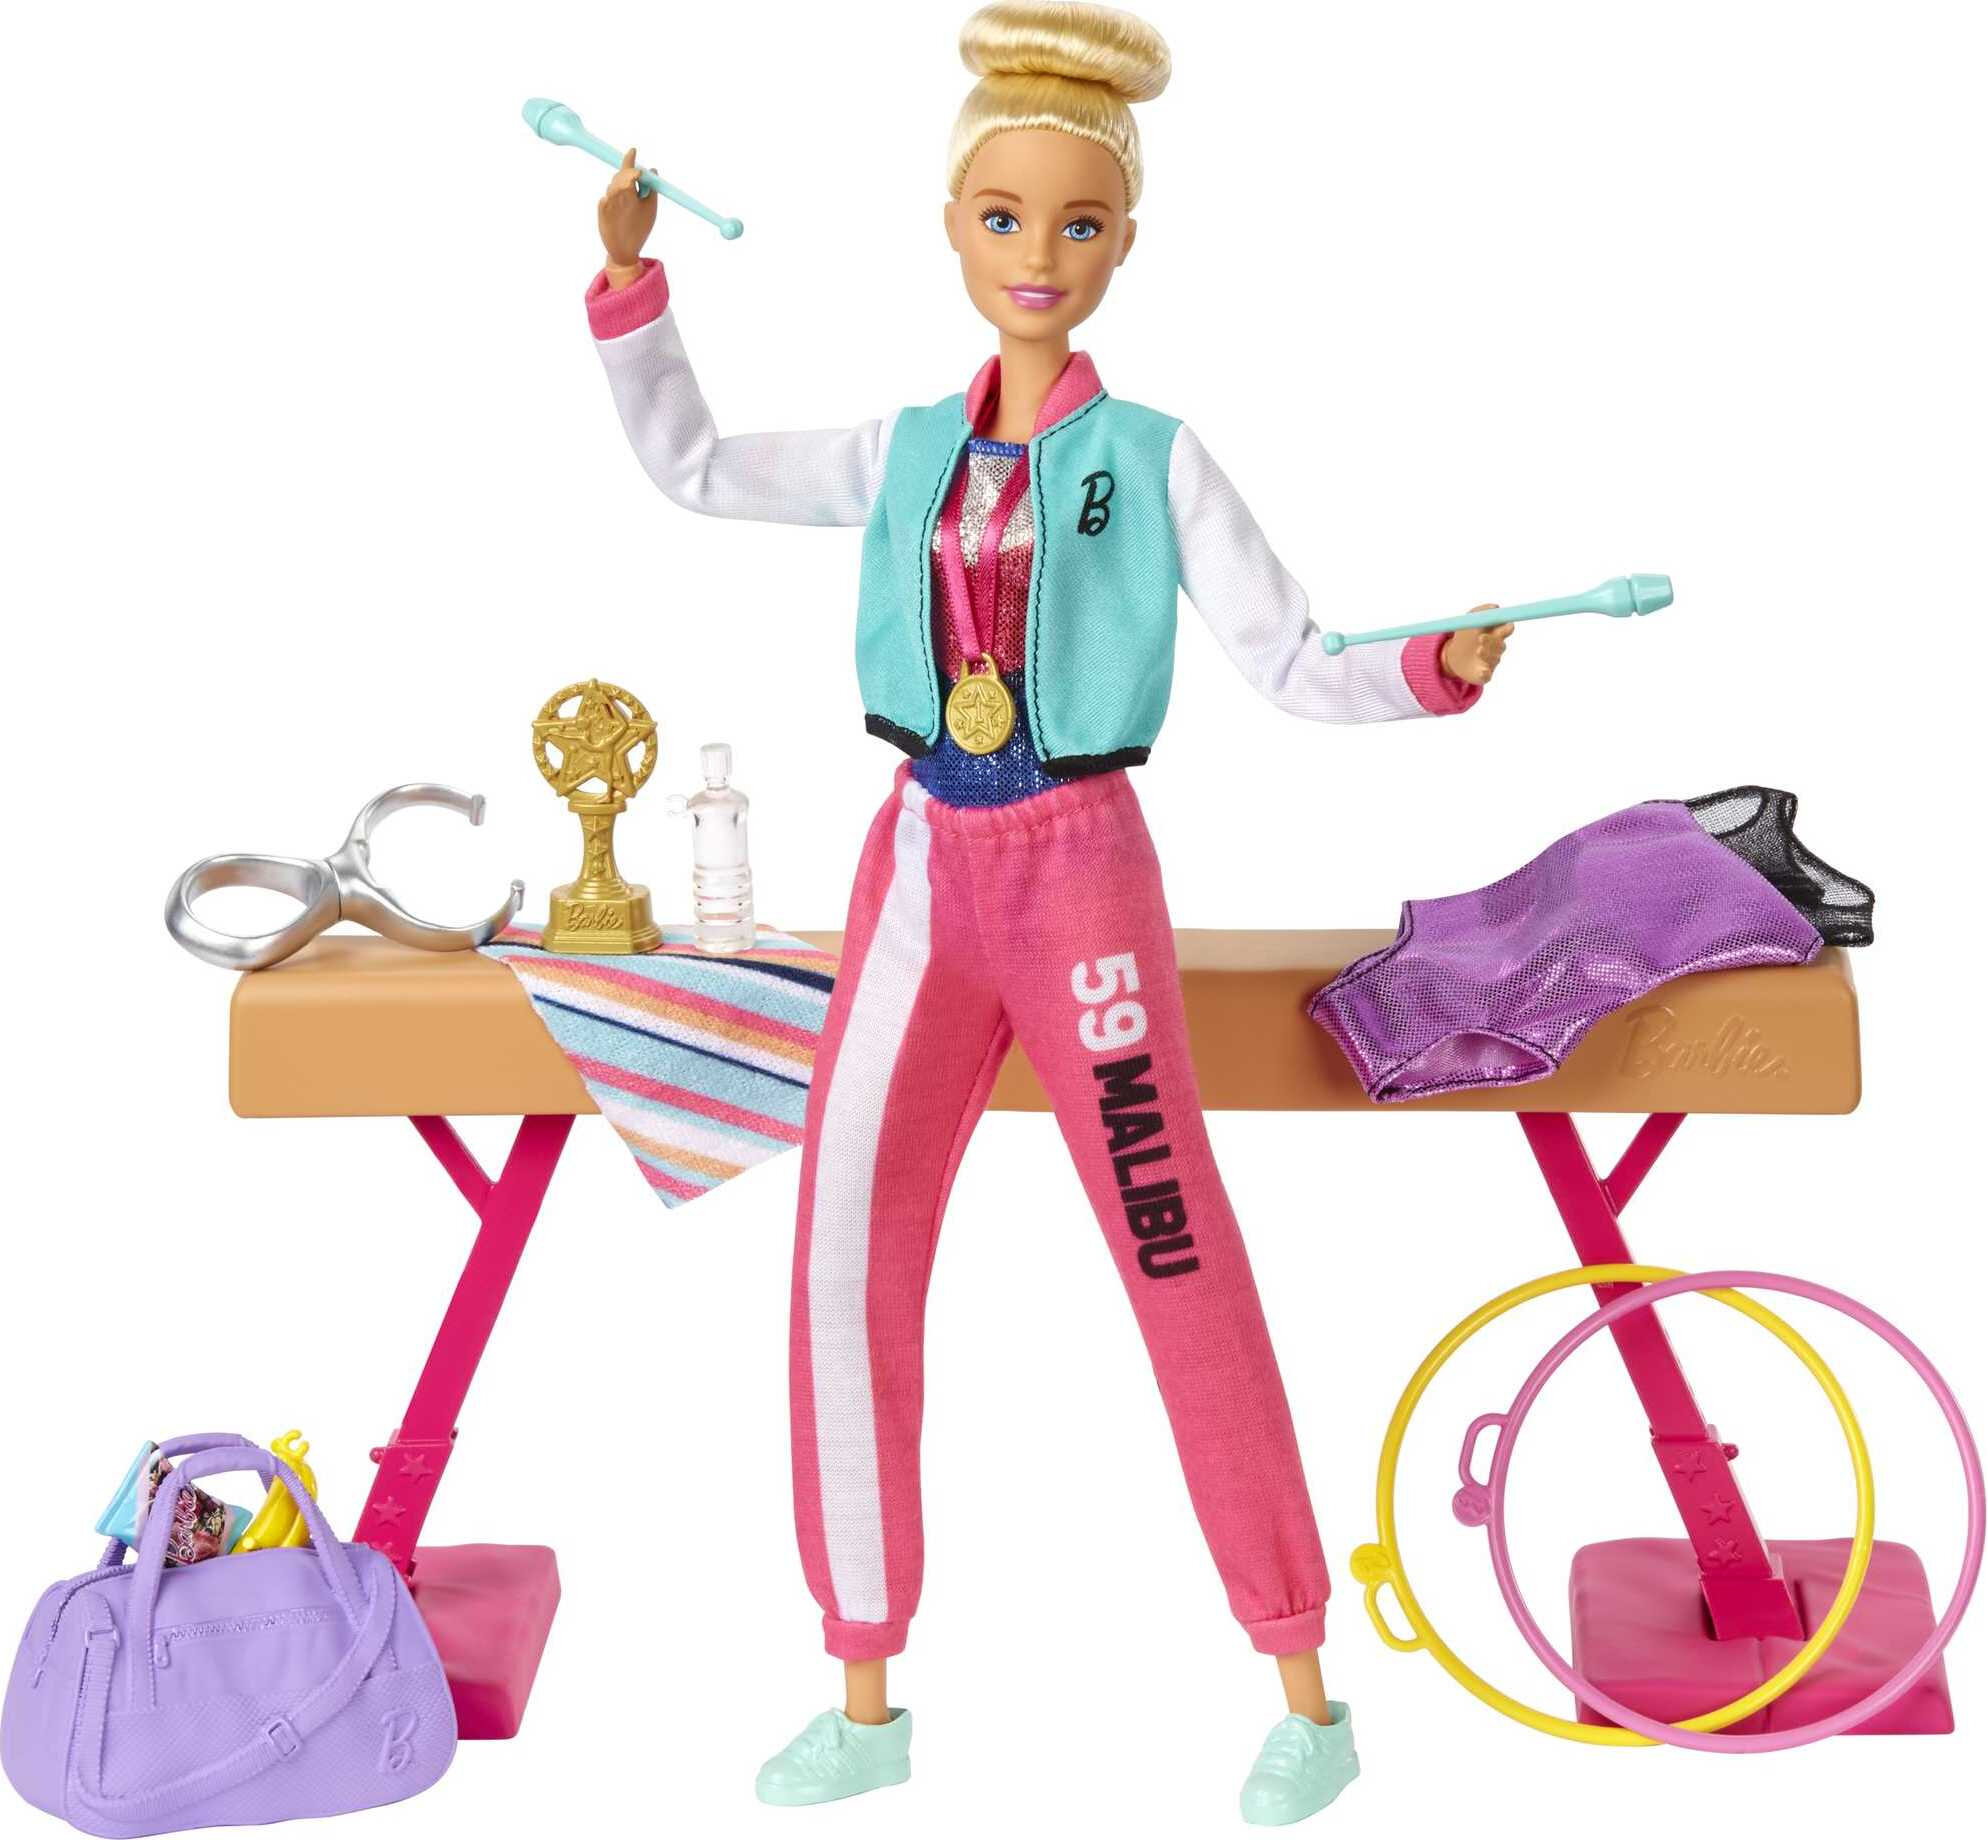 Barbie Gymnastics Playset with Blonde Doll and 15+ Accessories, Twirling Gymnast Toy with Balance Beam - image 1 of 6